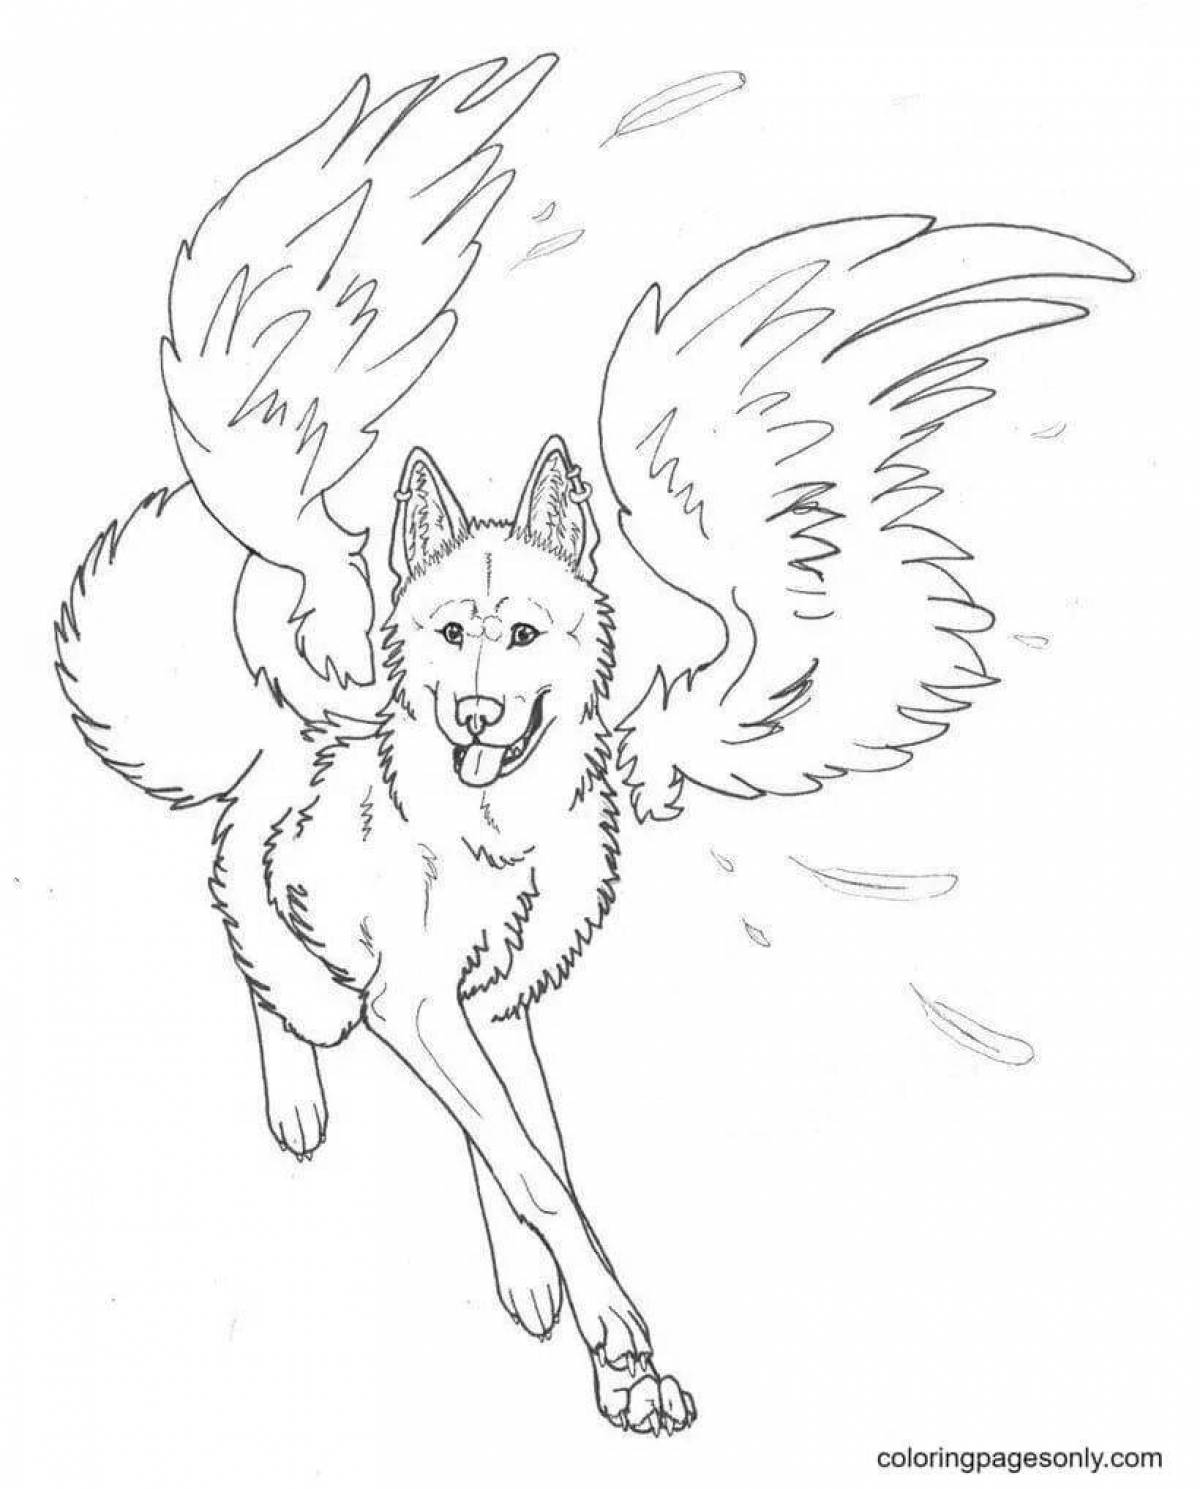 Radiant coloring fox with wings